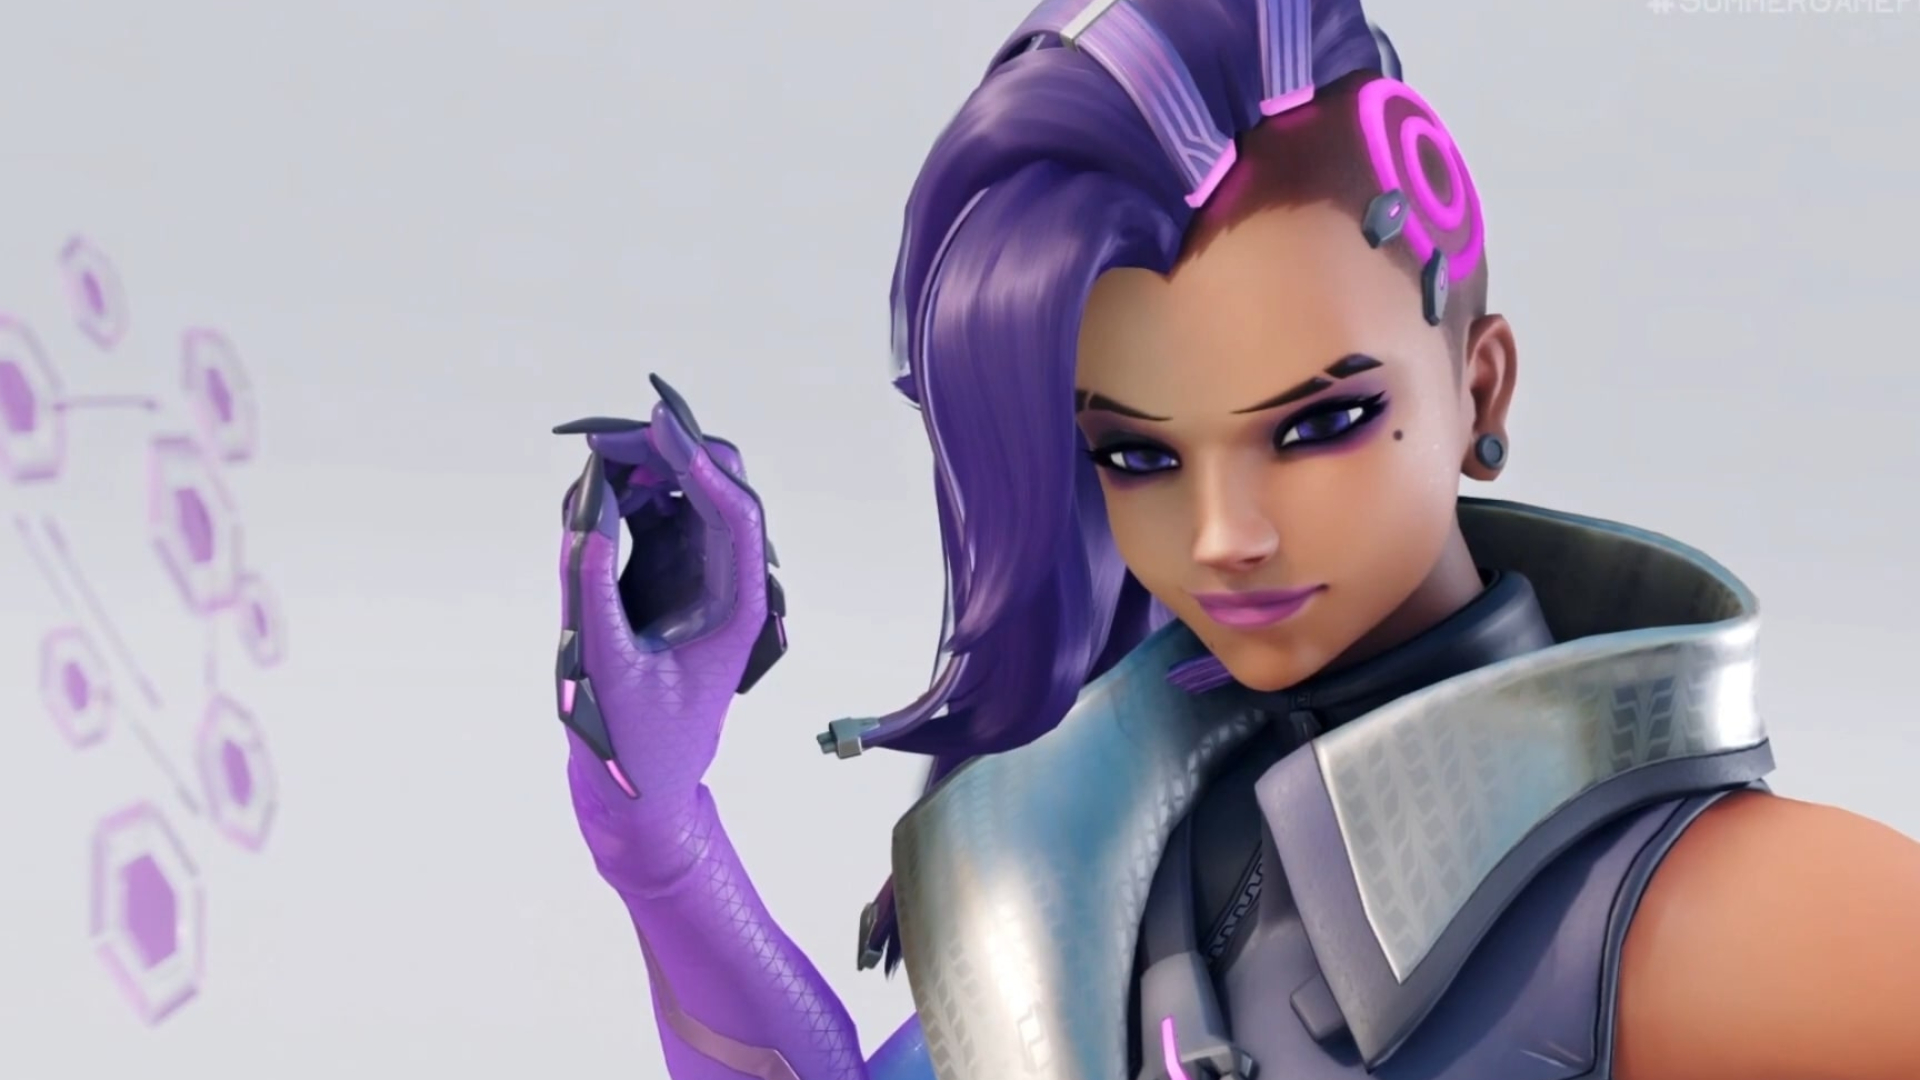 1920x1080 Overwatch 2 Trailer Shows Off New Looks for Sombra \u0026 Baptiste